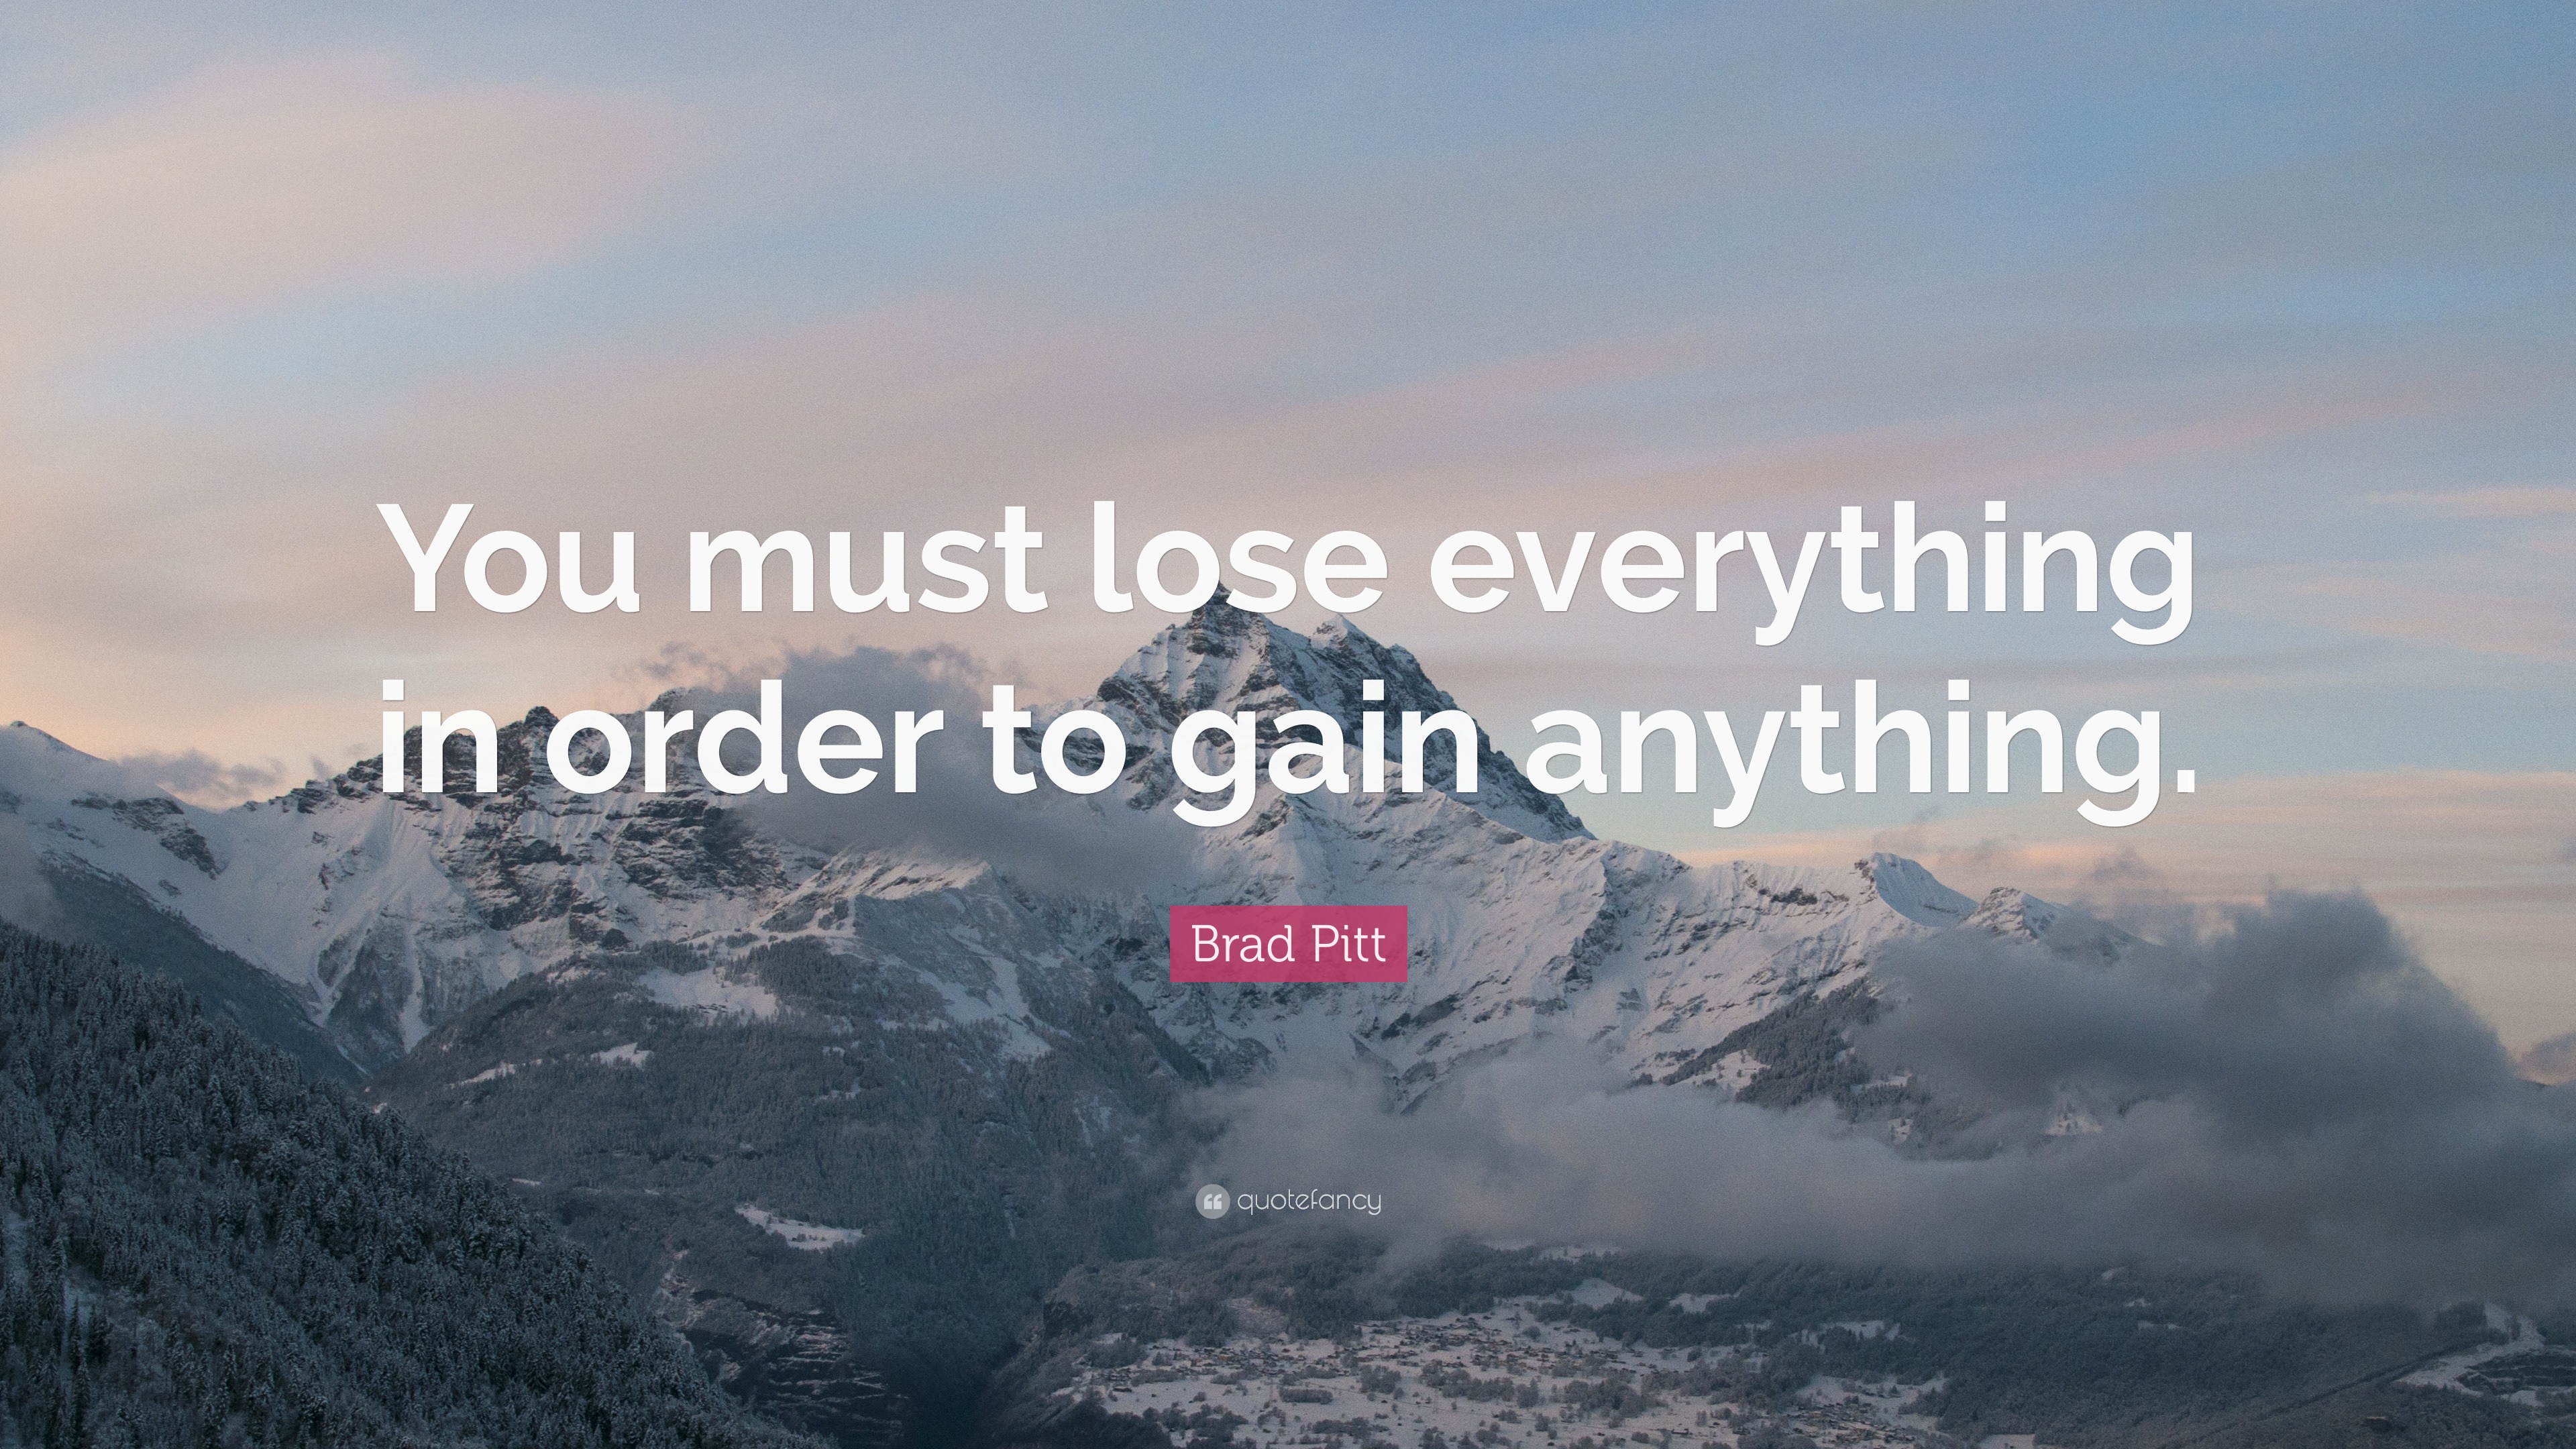 Brad Pitt Quote “you Must Lose Everything In Order To Gain Anything” 